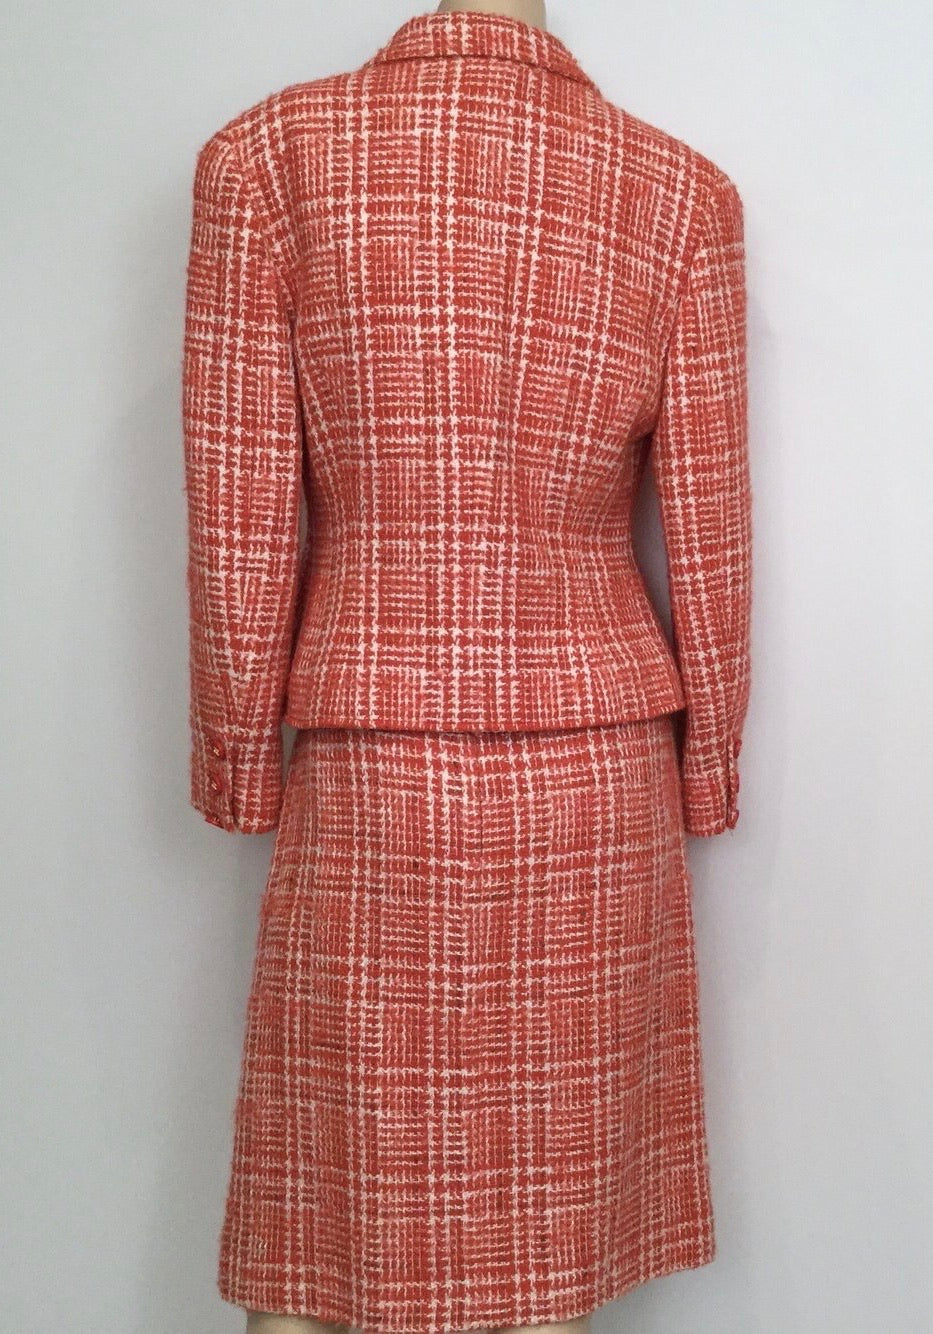 90s Chanel Wool Jacket & Dress Suit - Lucky Vintage